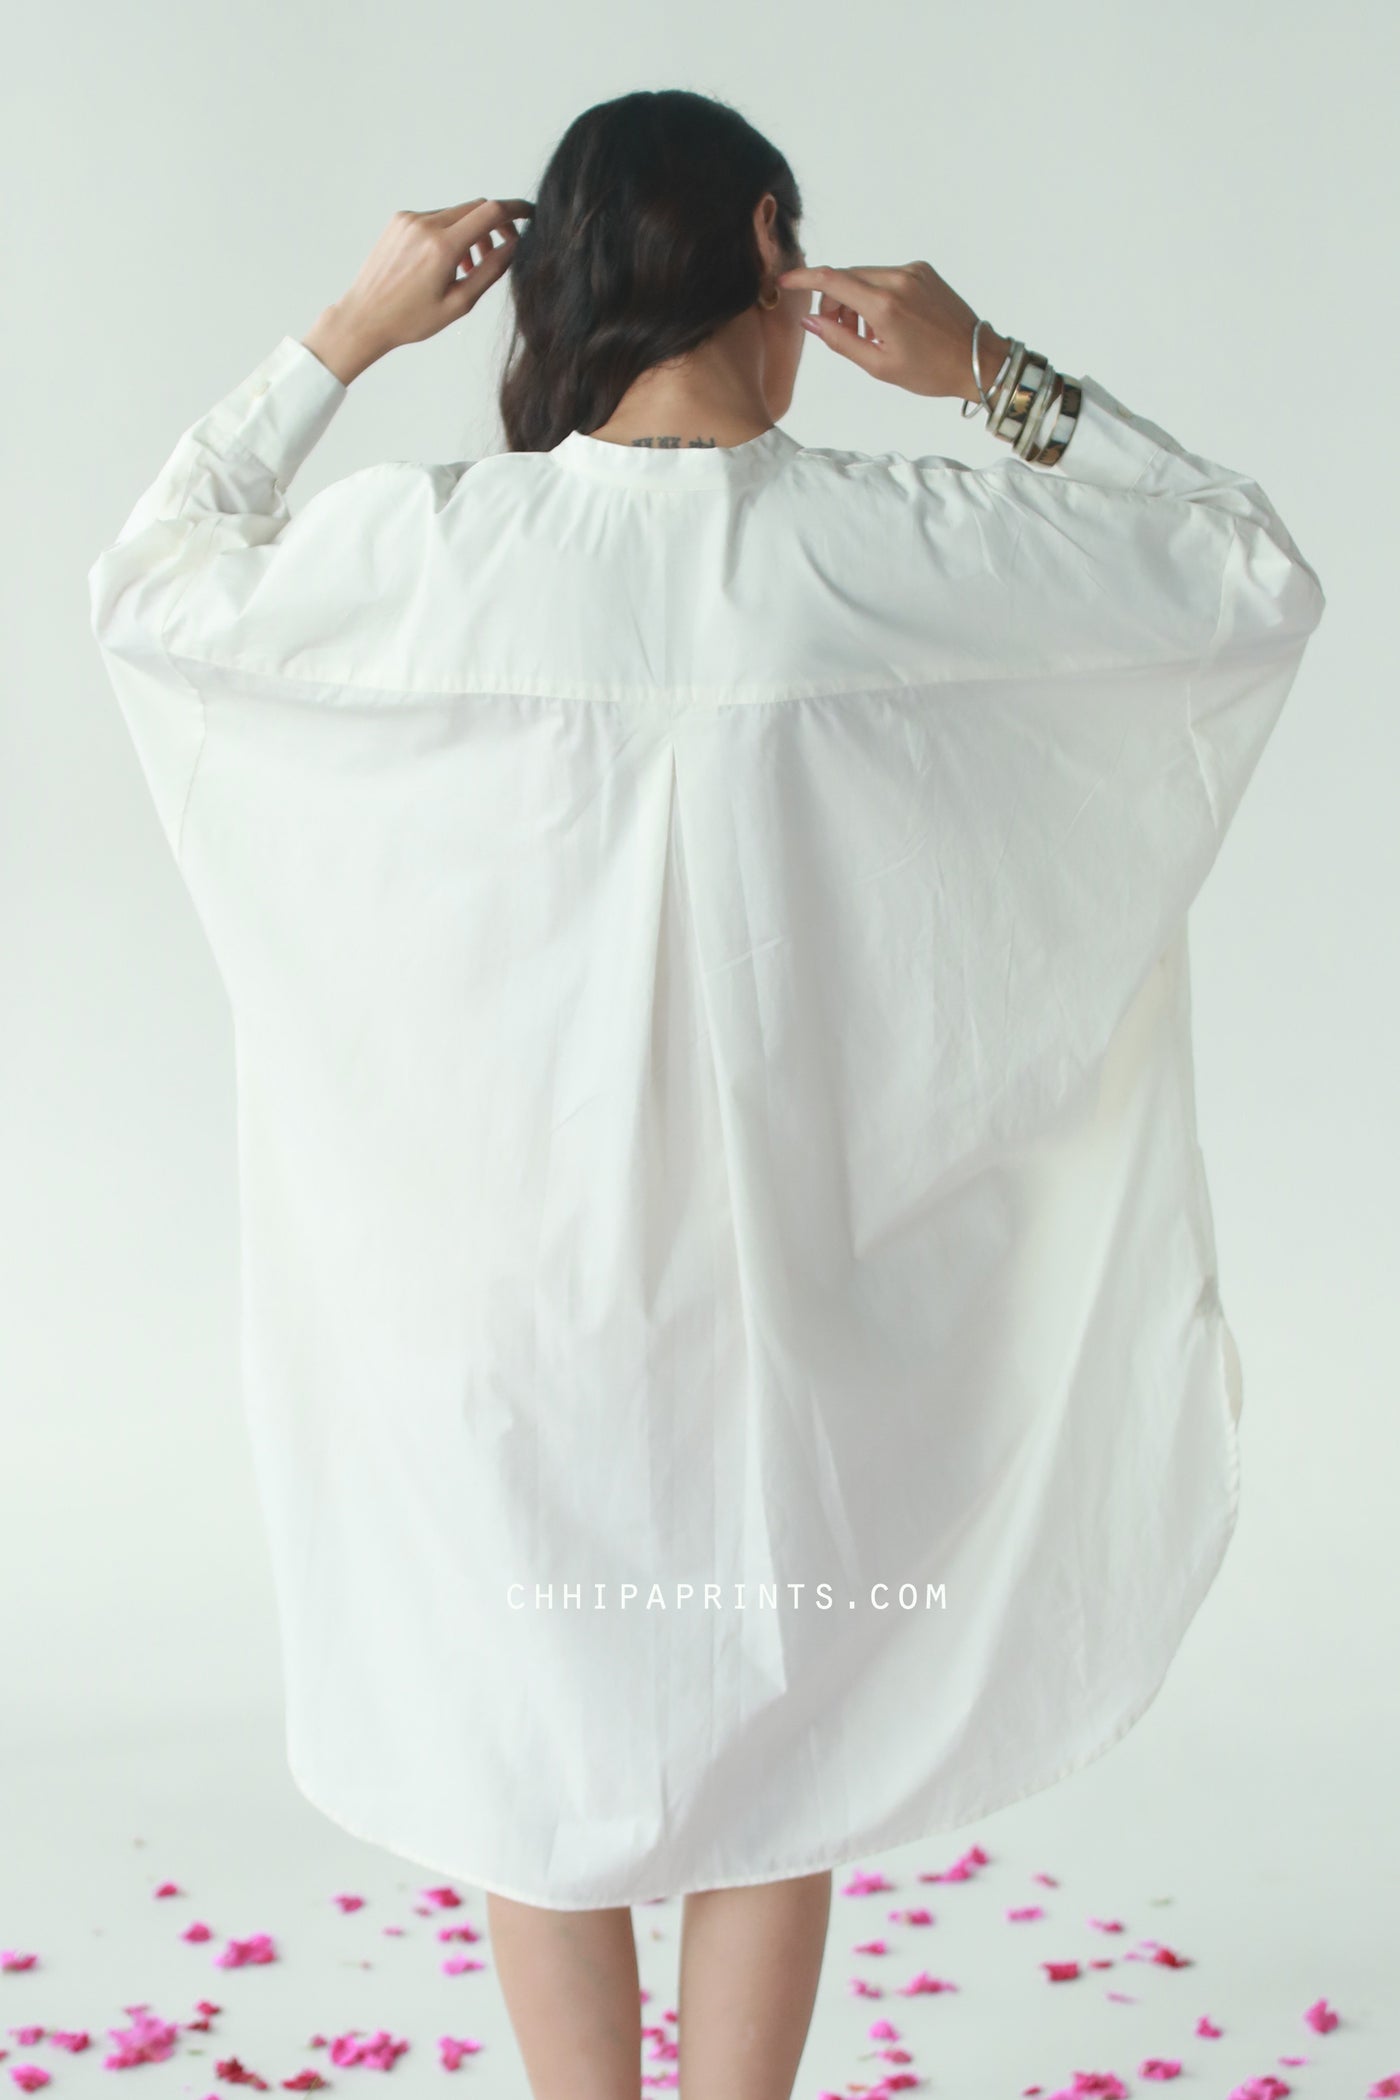 Cotton Sunday Tunic Plain Dye In Solid Ivory